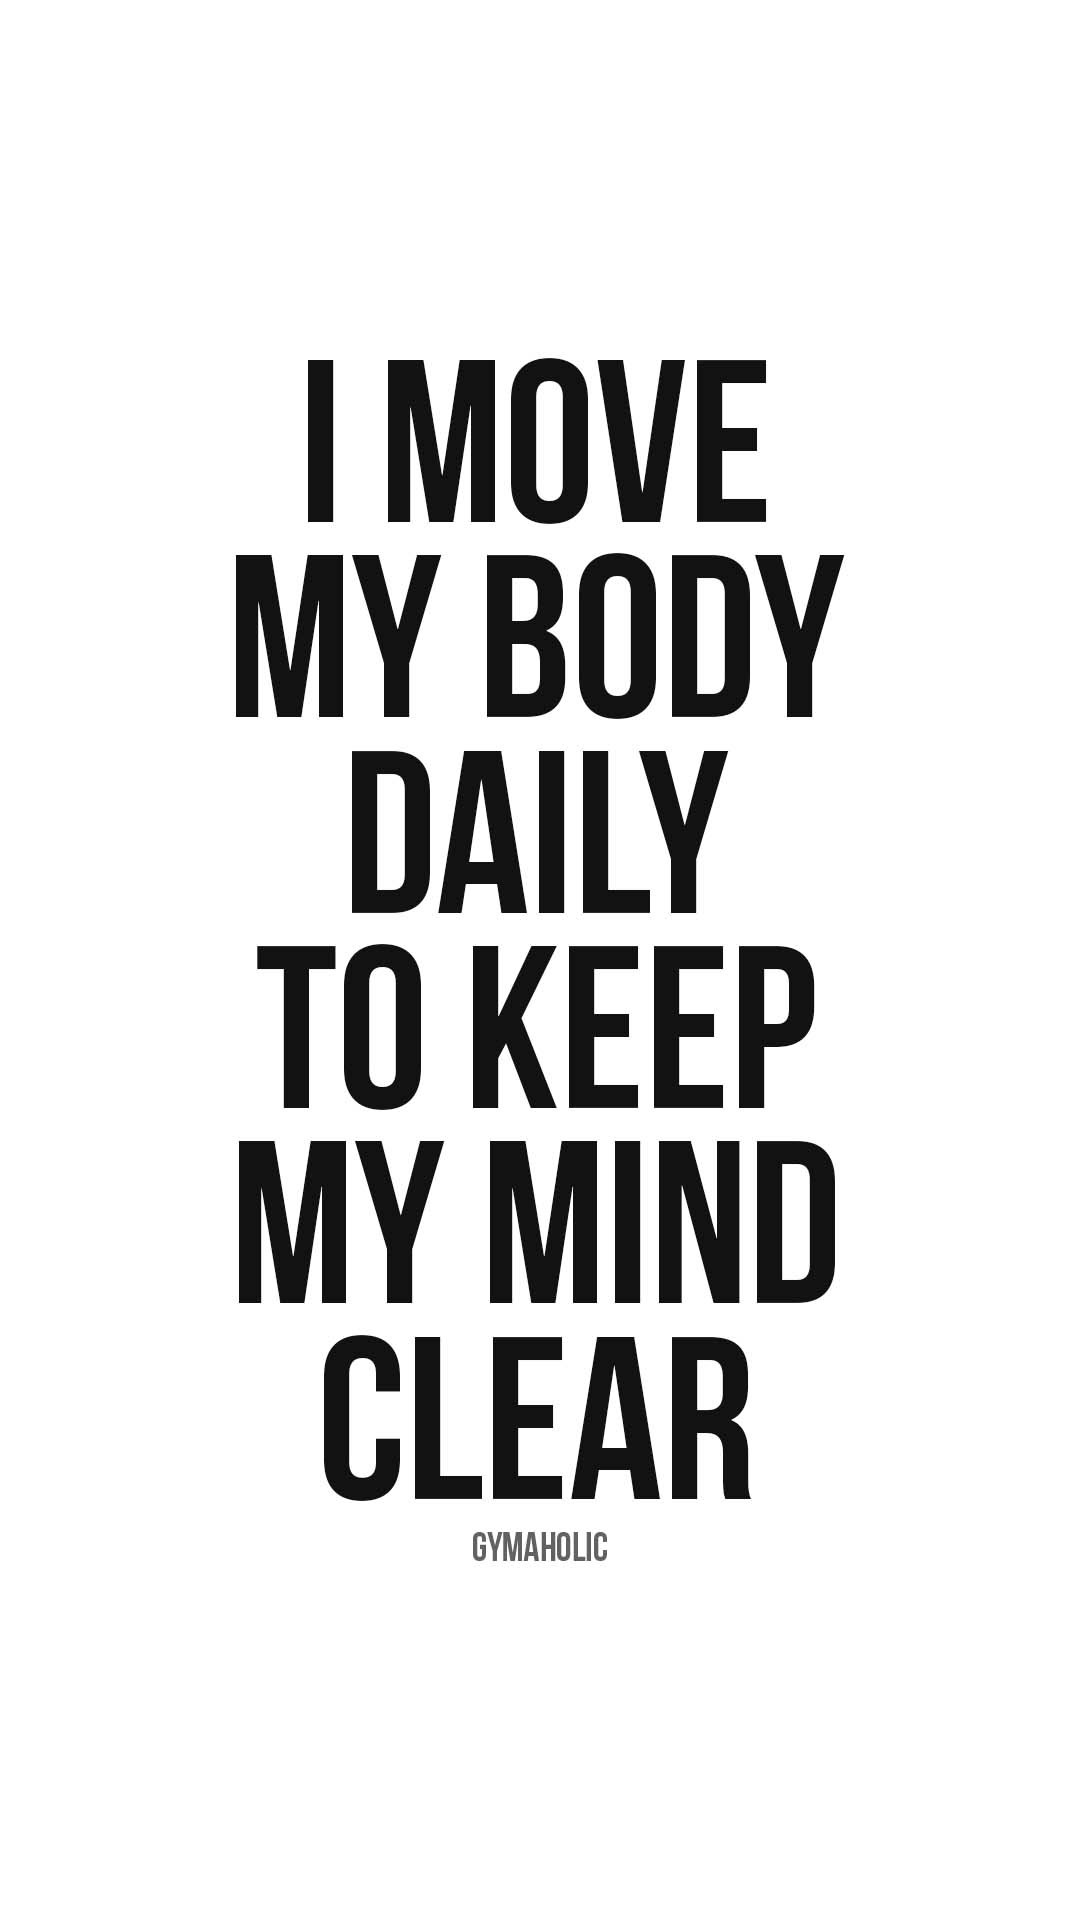 I move my body daily to keep my mind clear